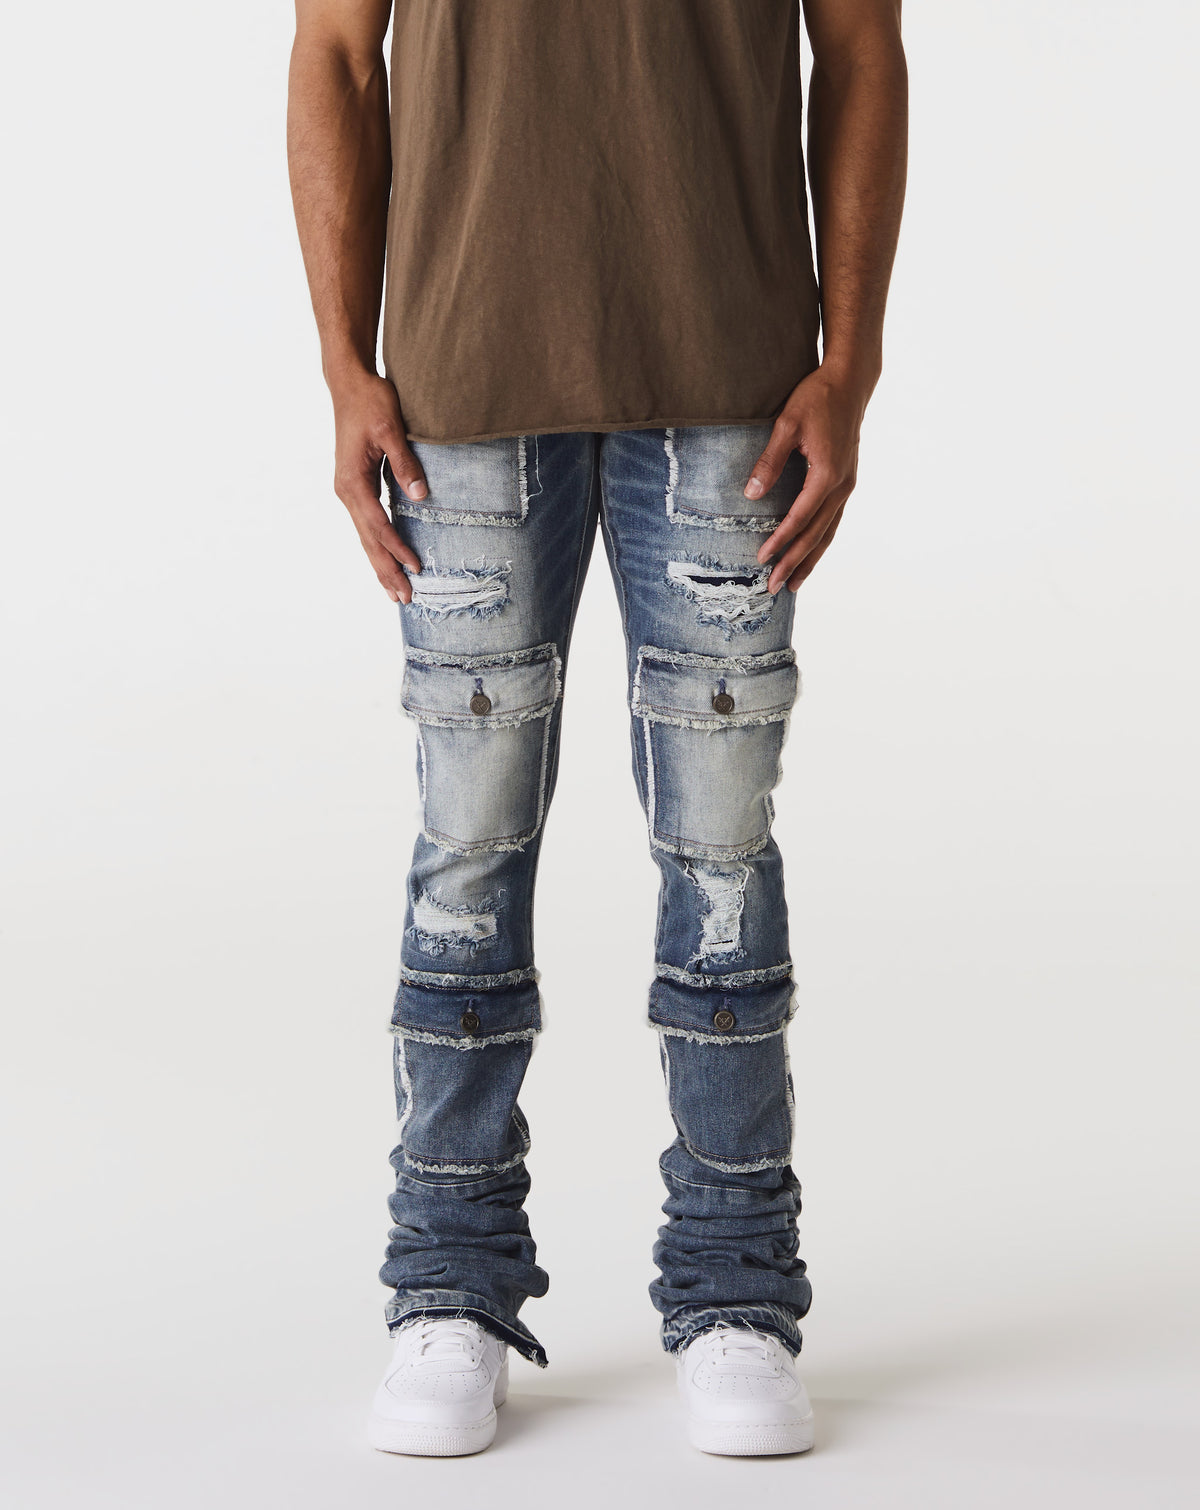 Doctrine Savant Stacked Jeans - Rule of Next Apparel